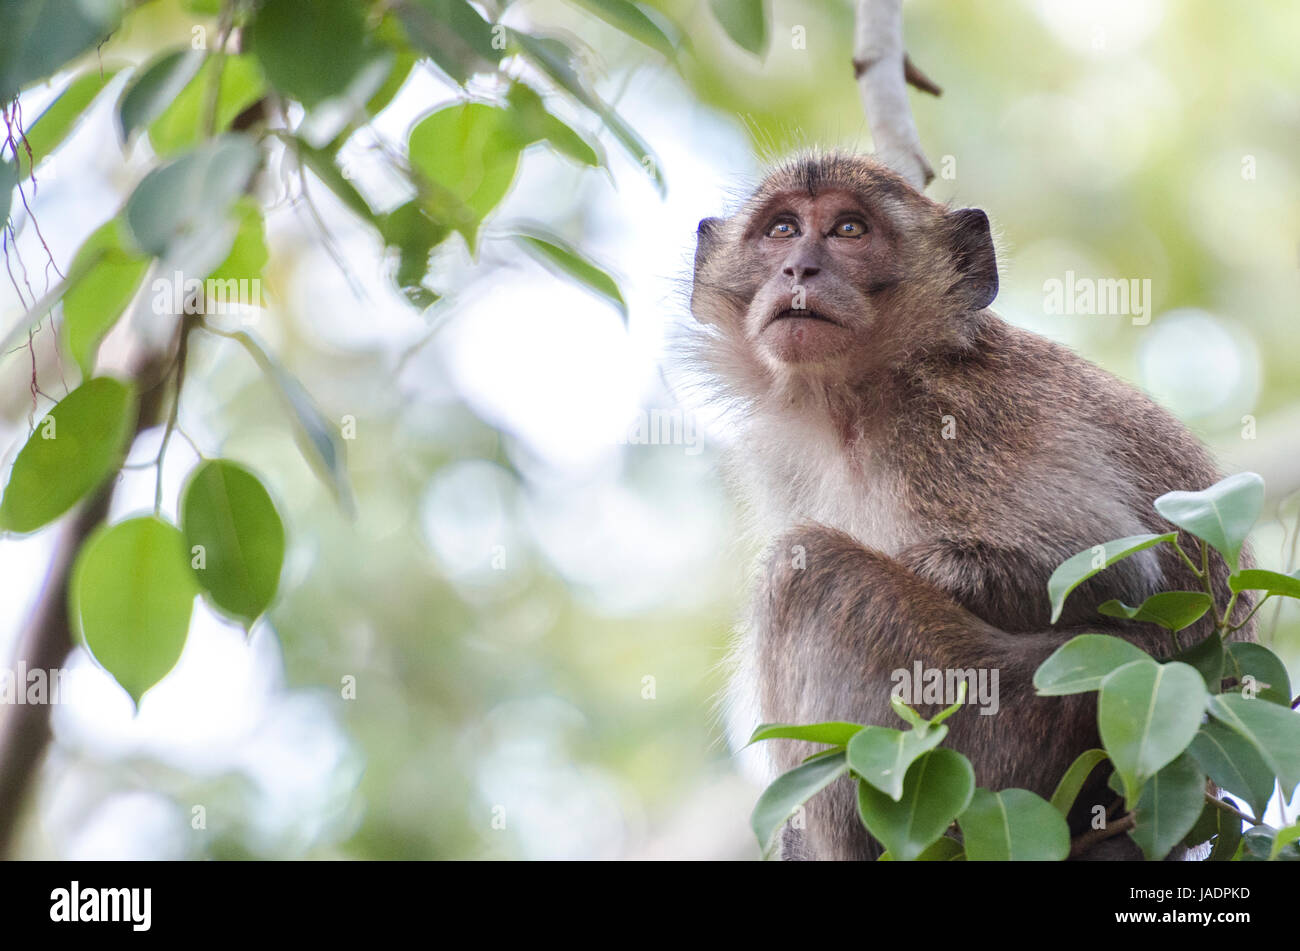 Young crab-eating macaque (Macaca fascicularis) or long-tailed macaque contemplating while sitting on a tree in Thailand Stock Photo